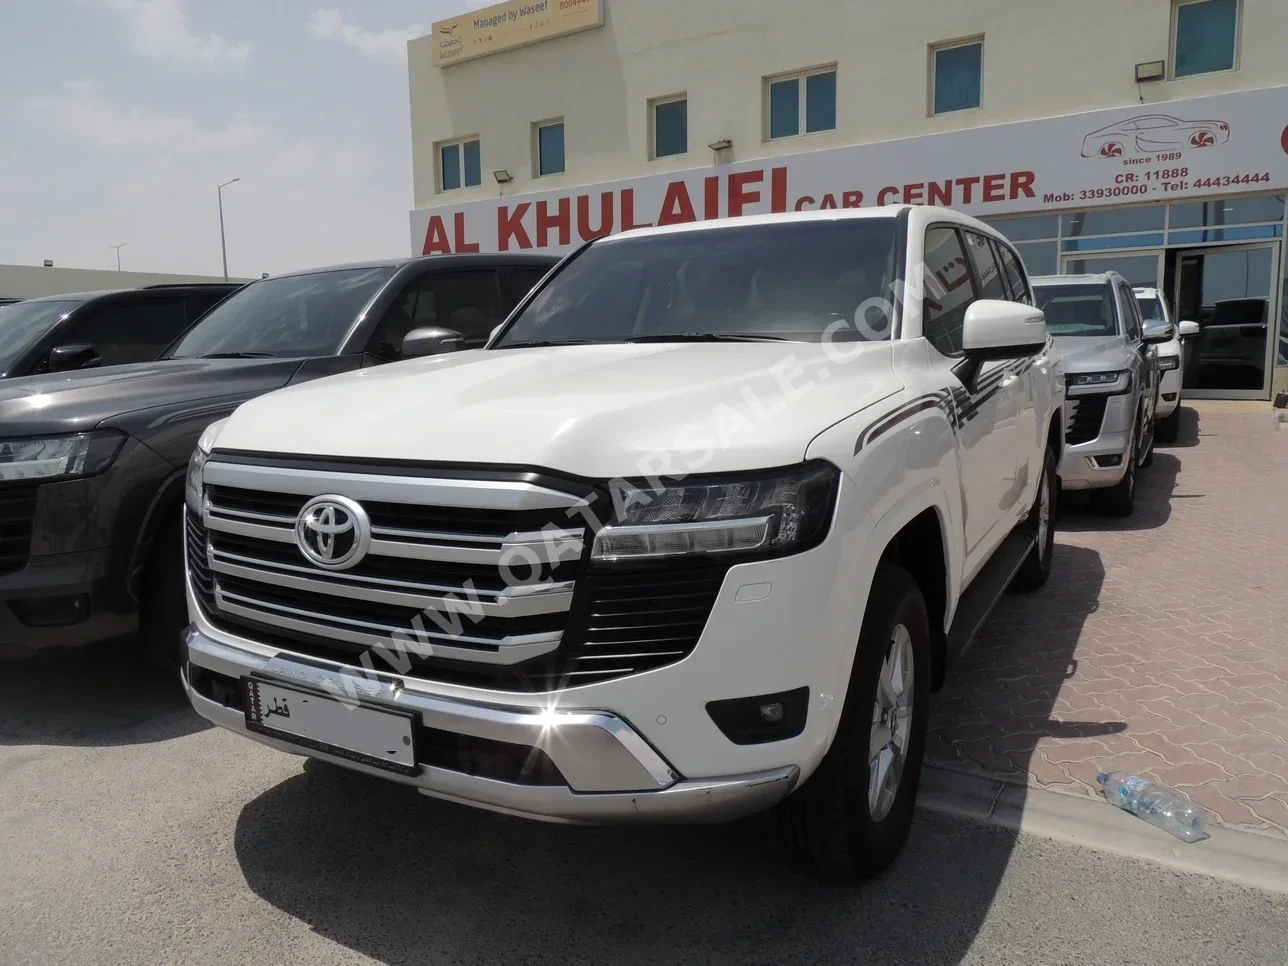 Toyota  Land Cruiser  GXR Twin Turbo  2022  Automatic  70,000 Km  6 Cylinder  Four Wheel Drive (4WD)  SUV  White